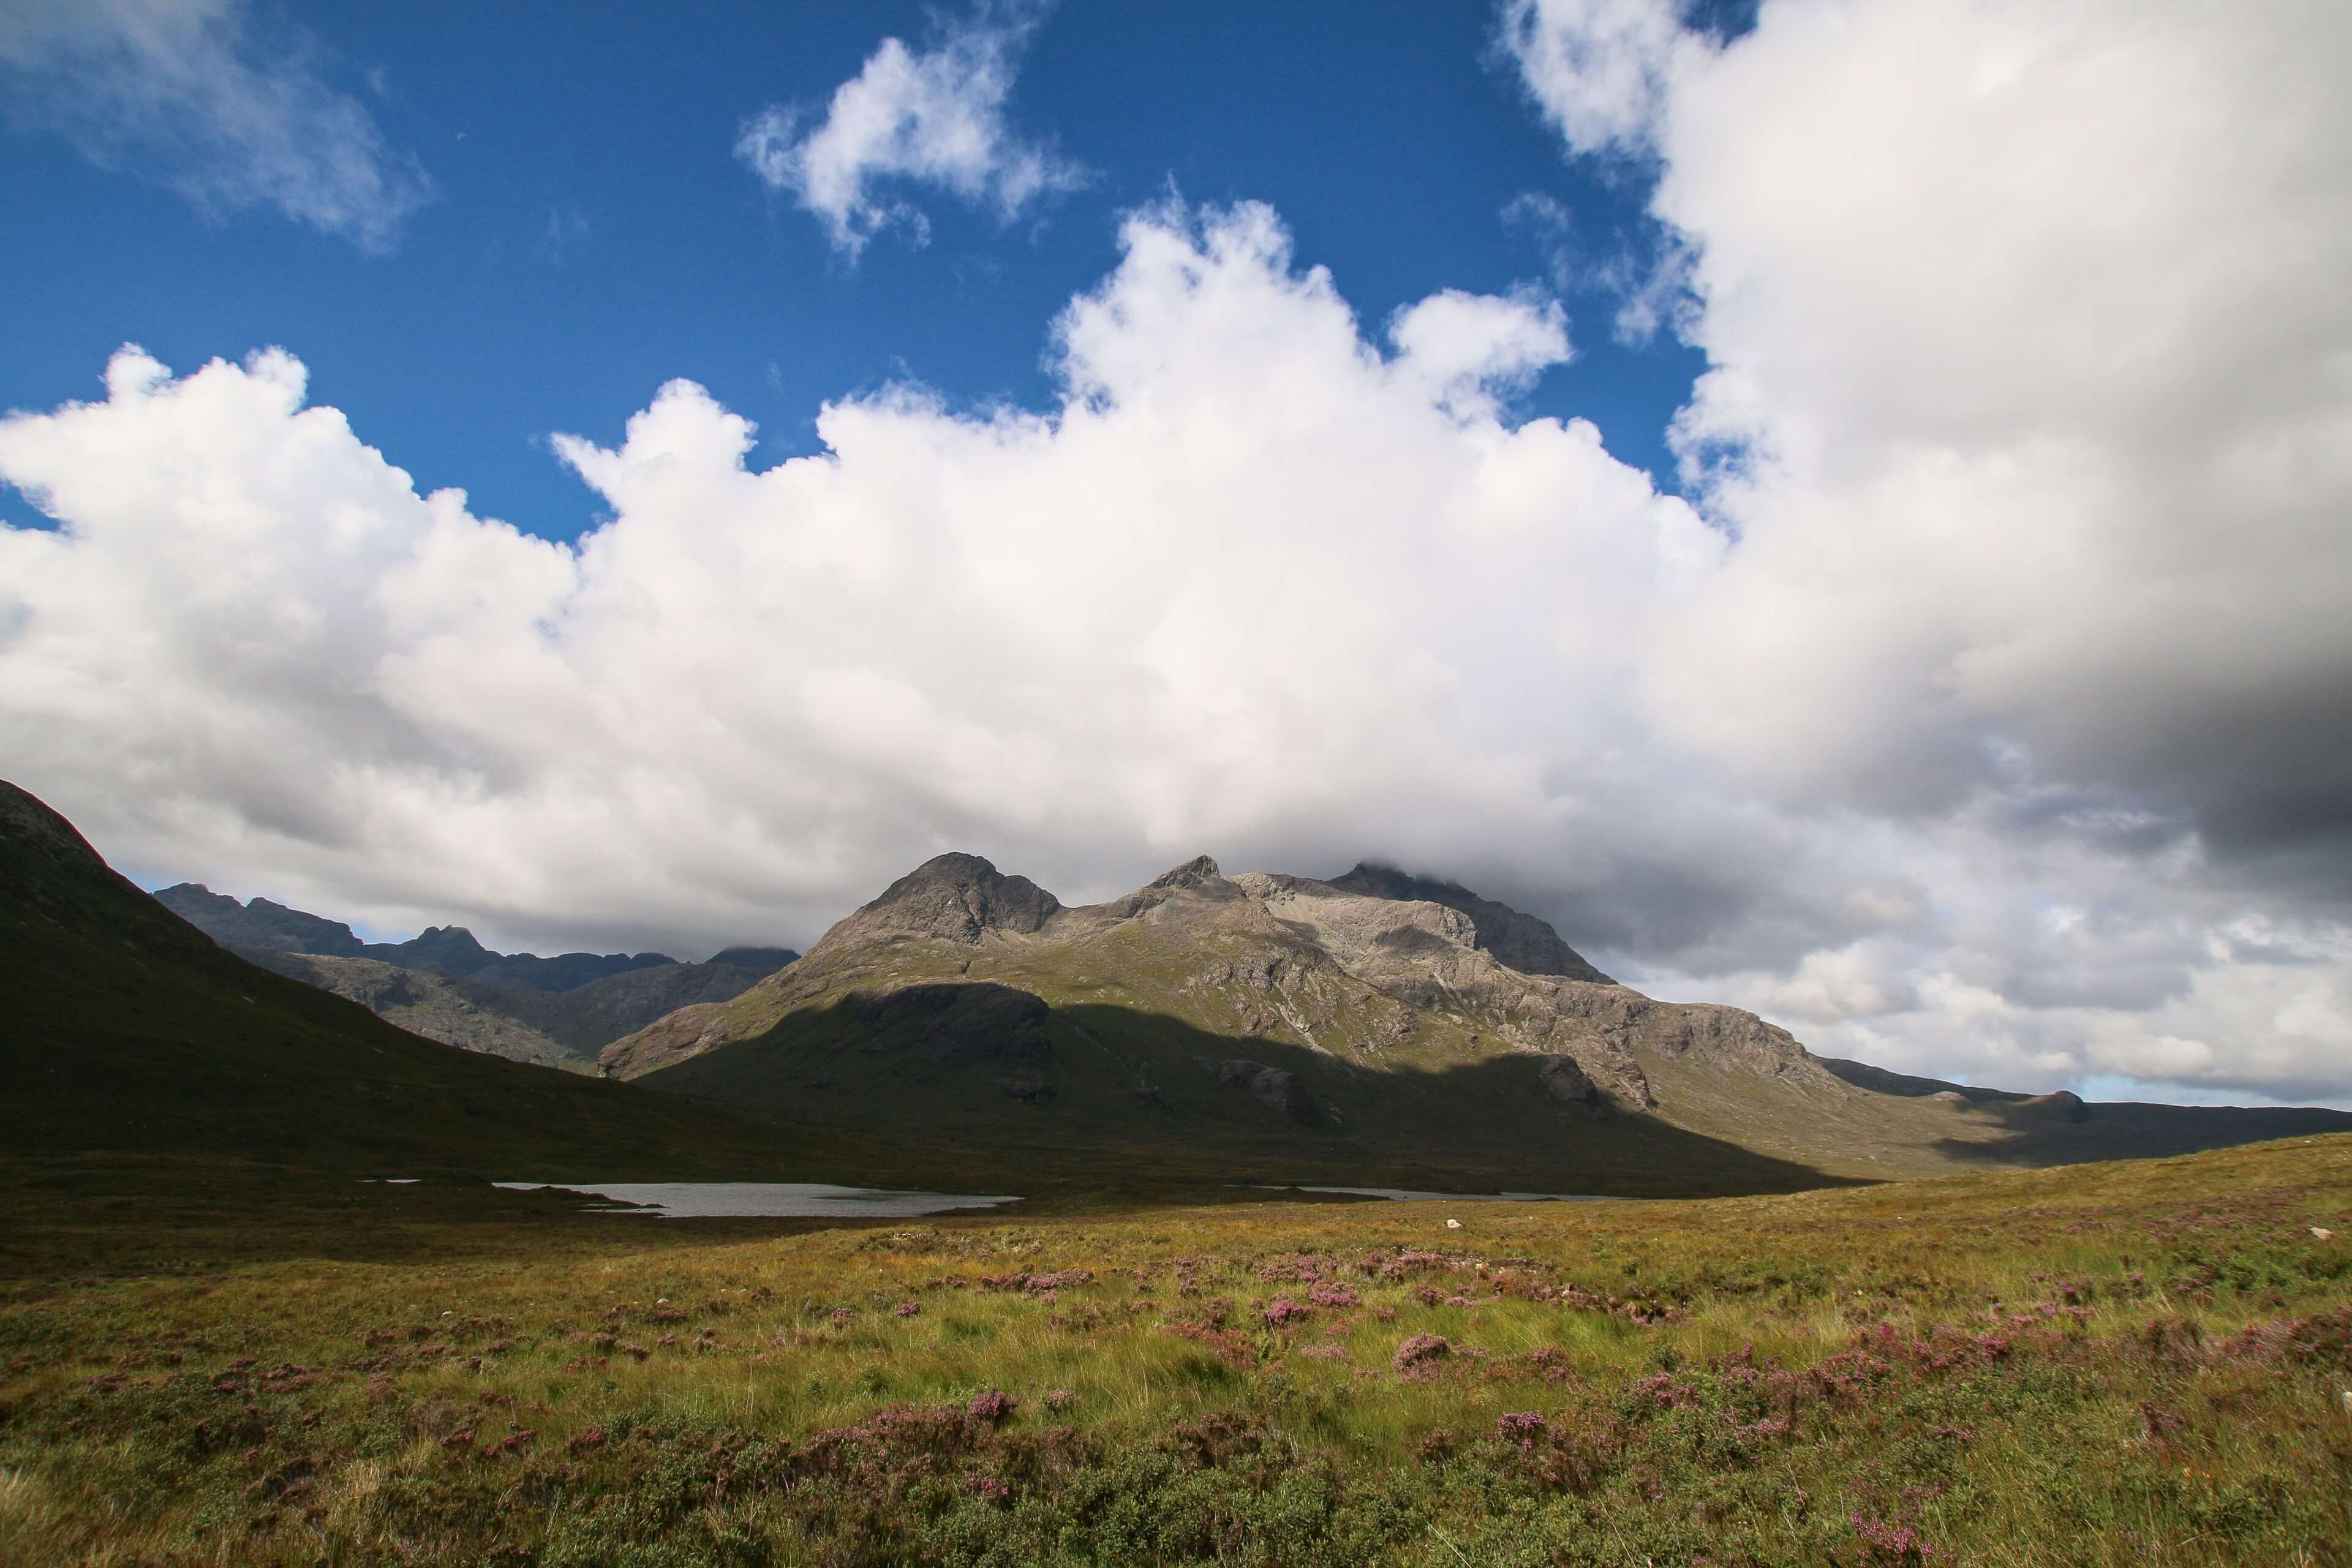 The Cuillin Mountains